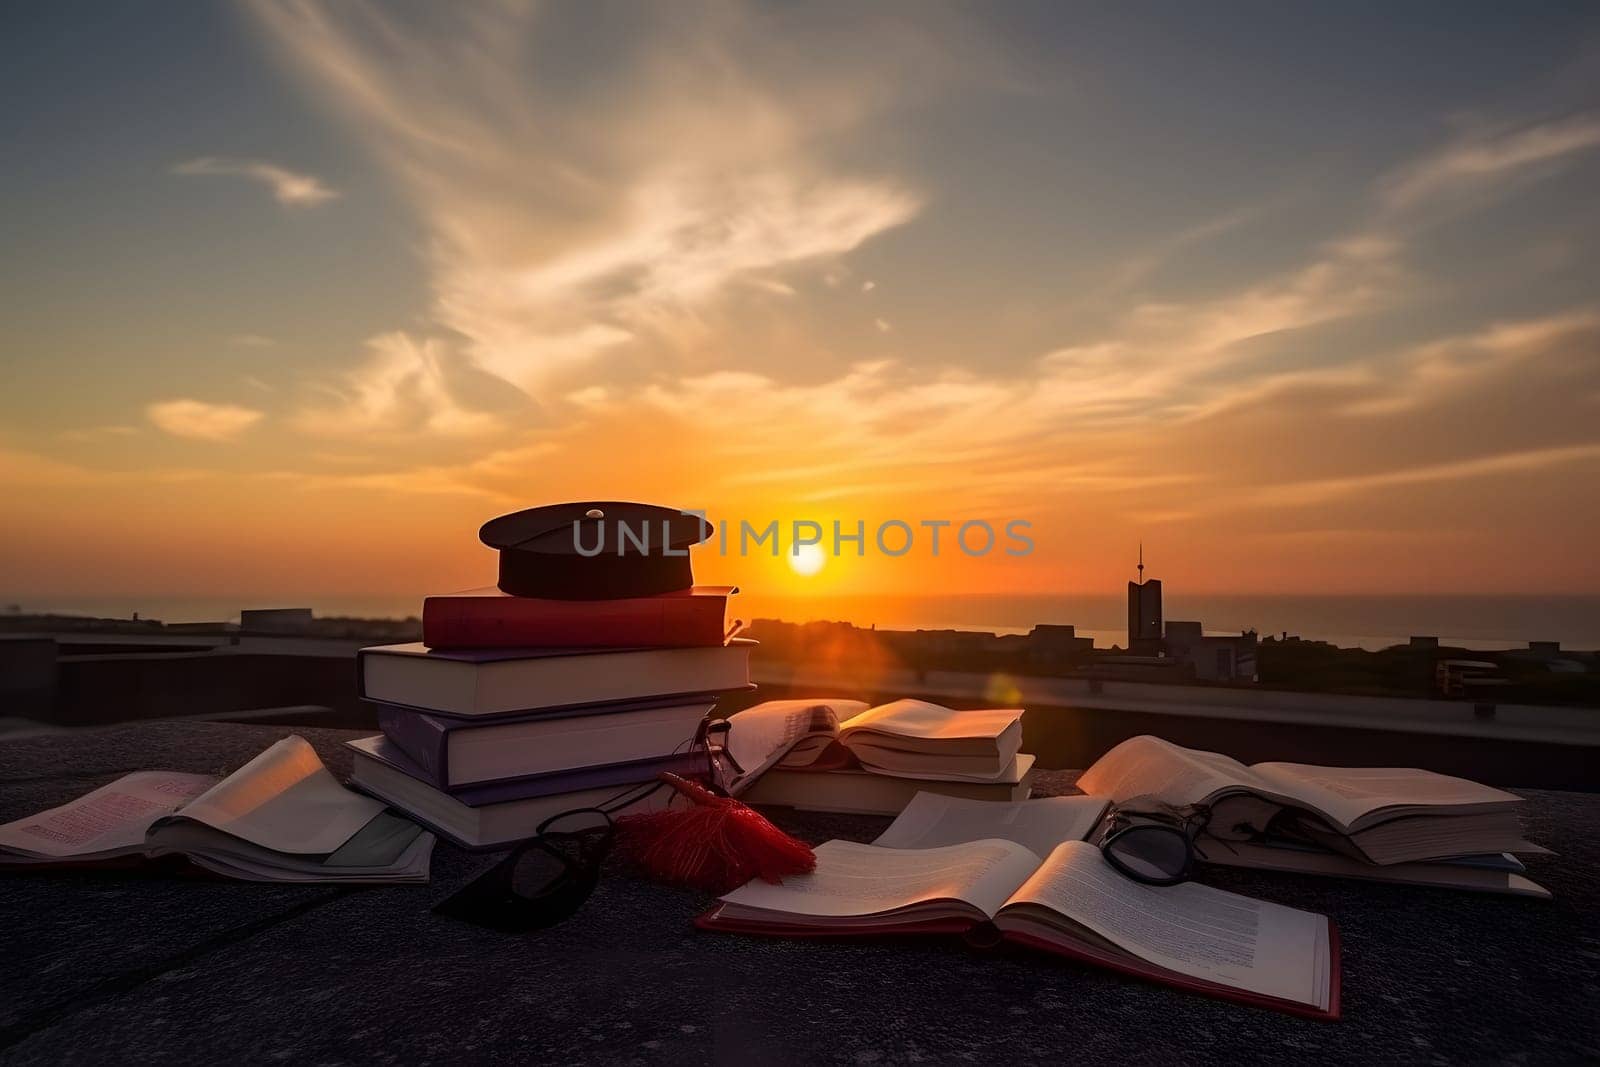 a stack of books and graduation cap on the roof with the sunset in the background. Neural network generated in May 2023. Not based on any actual scene or pattern.